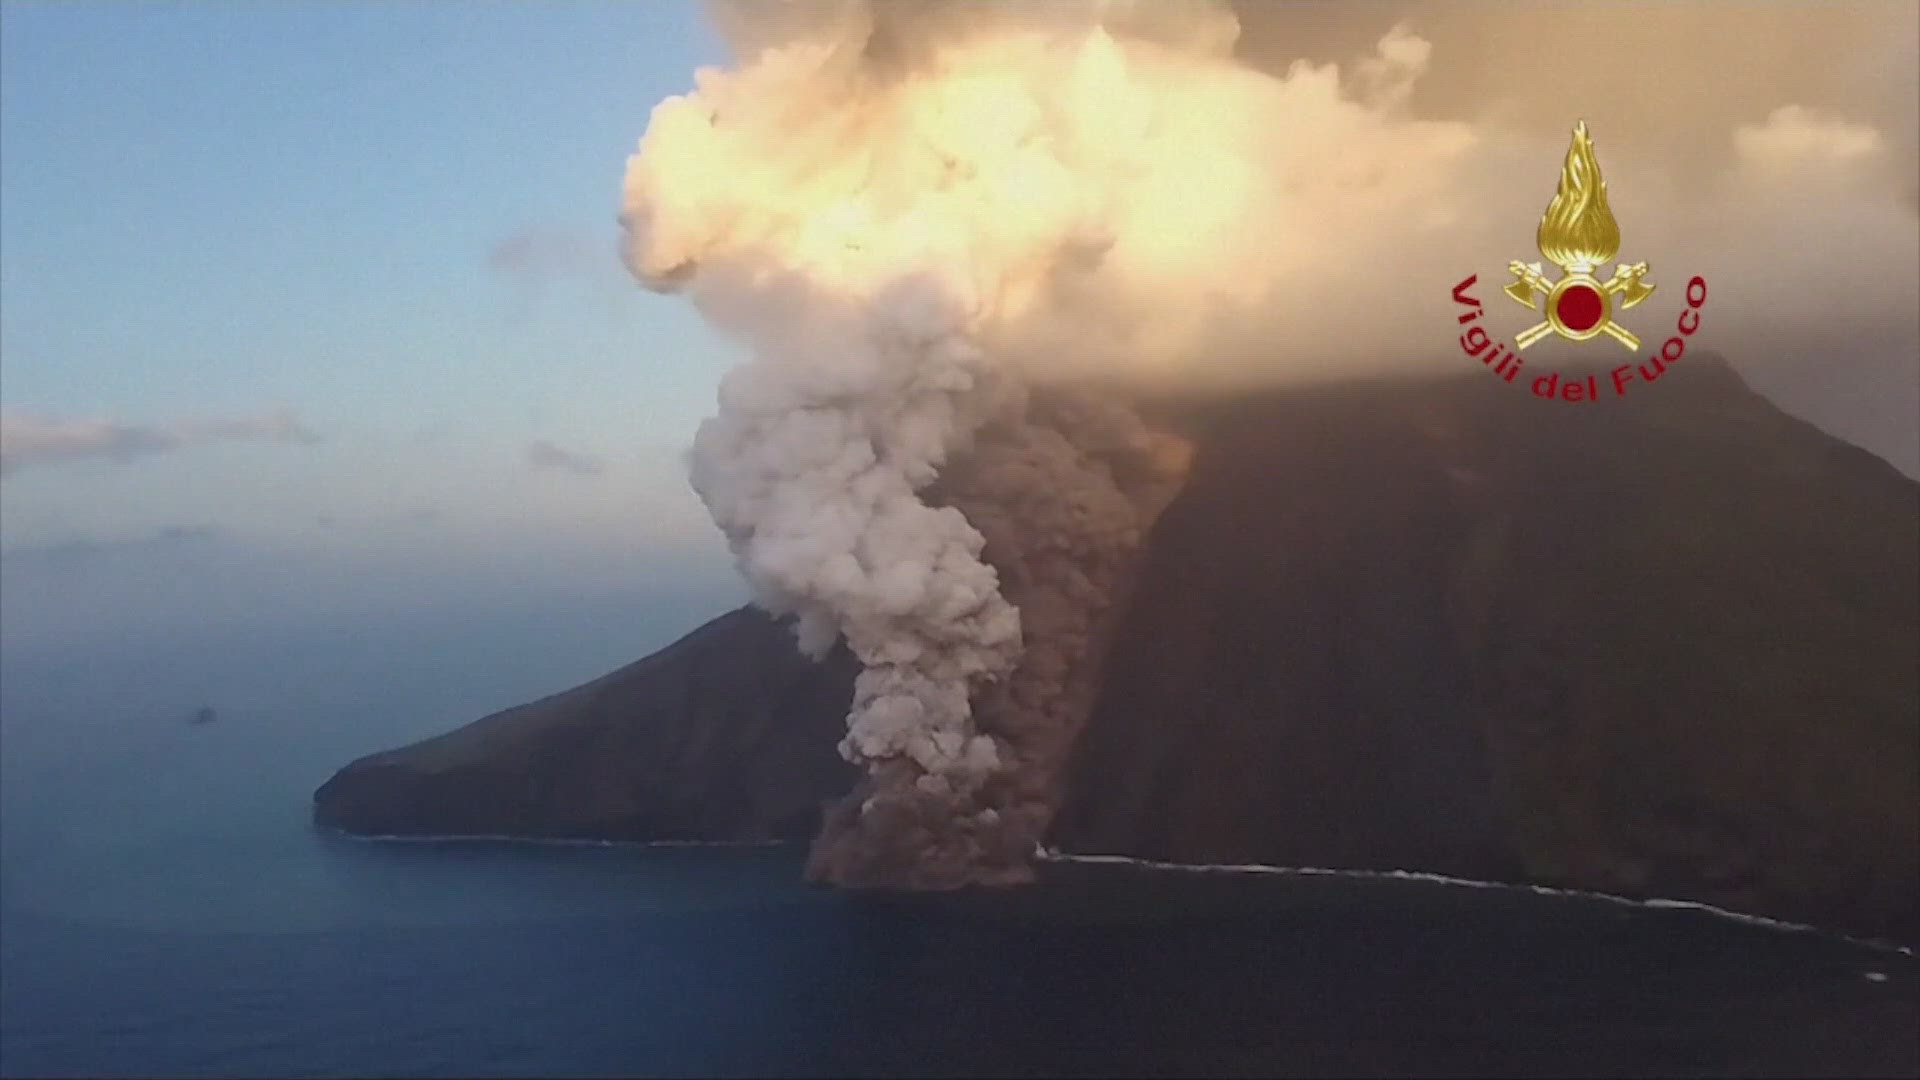 New video shows the volcano spewing smoke and ash while lava flows into the Mediterranean Sea.